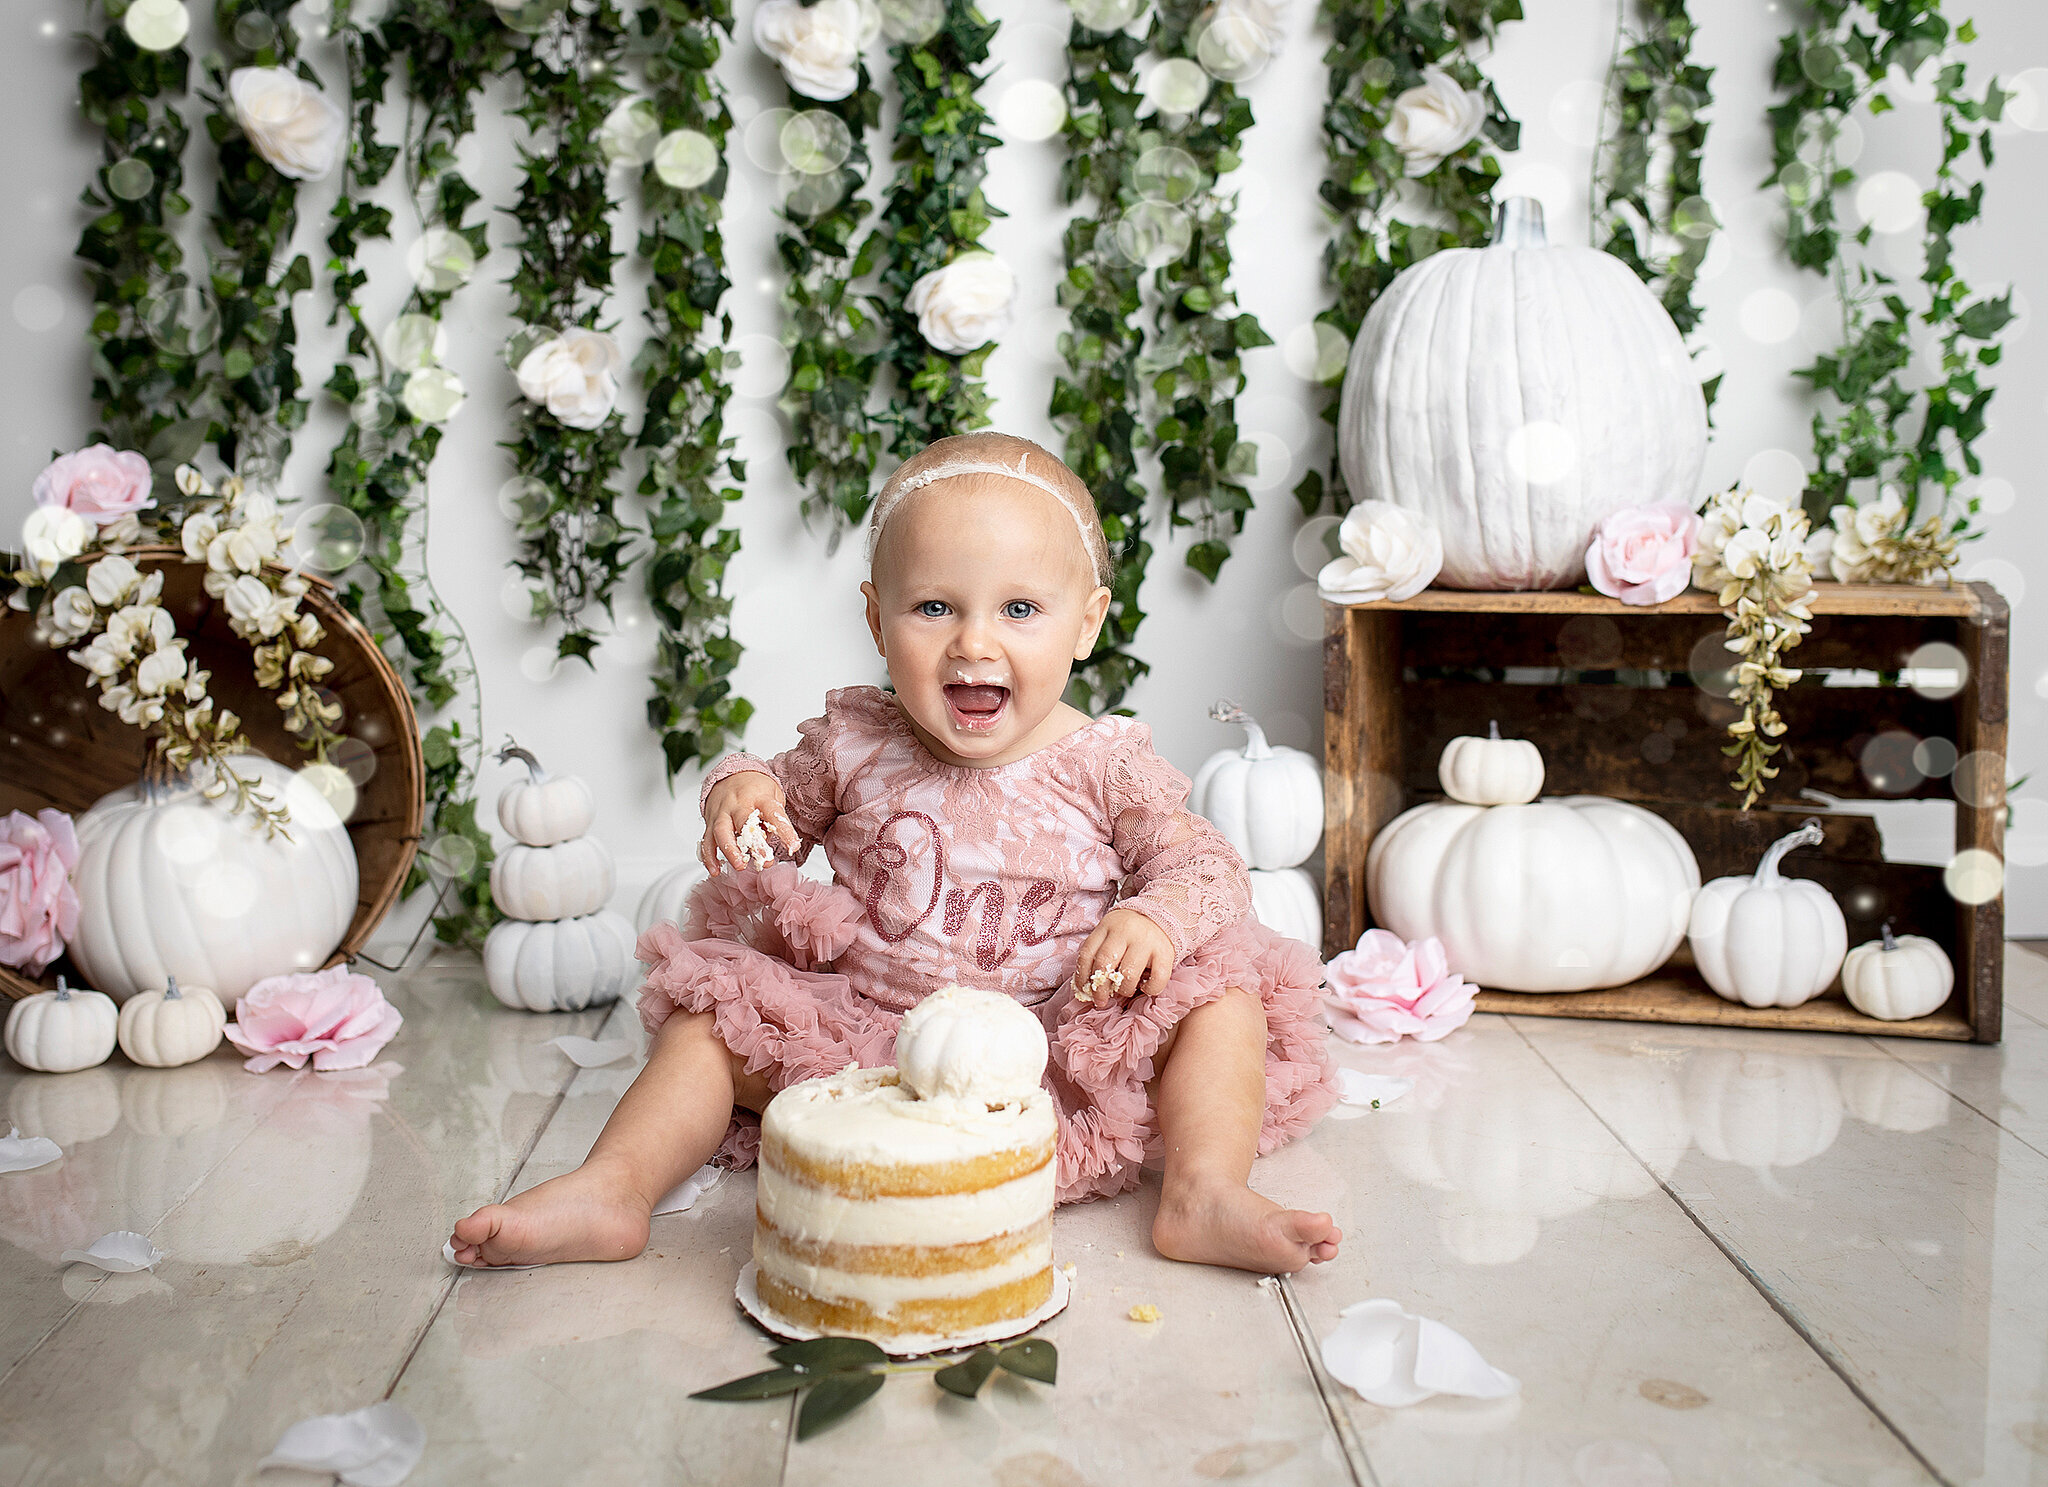 baby smashing white cake in pink dress, white pumpkins and greenery in the background